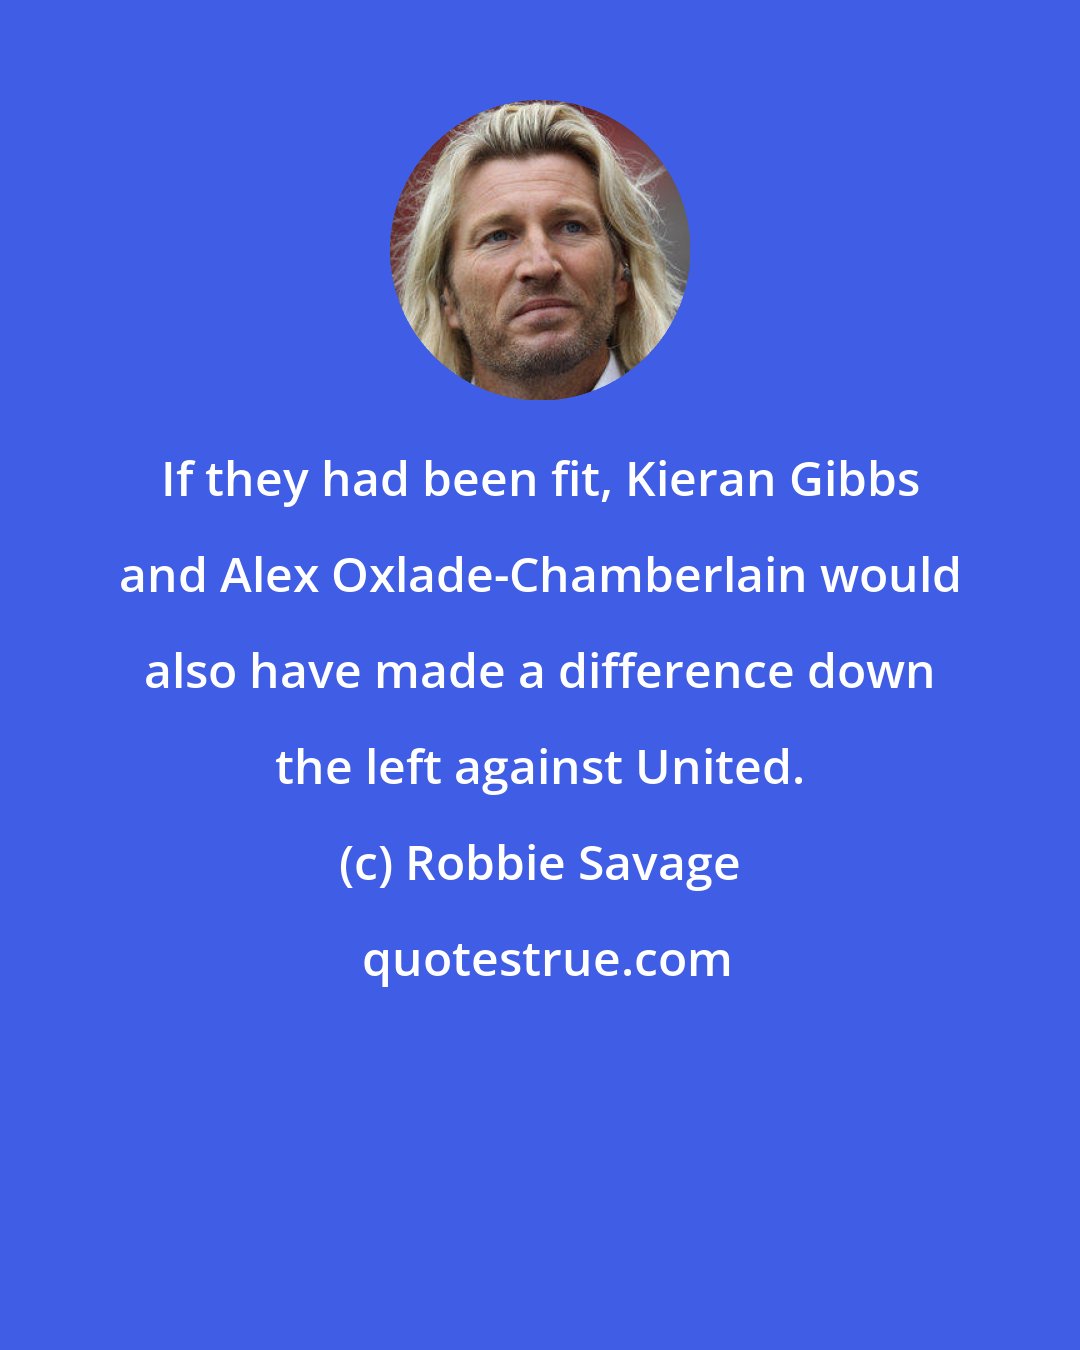 Robbie Savage: If they had been fit, Kieran Gibbs and Alex Oxlade-Chamberlain would also have made a difference down the left against United.